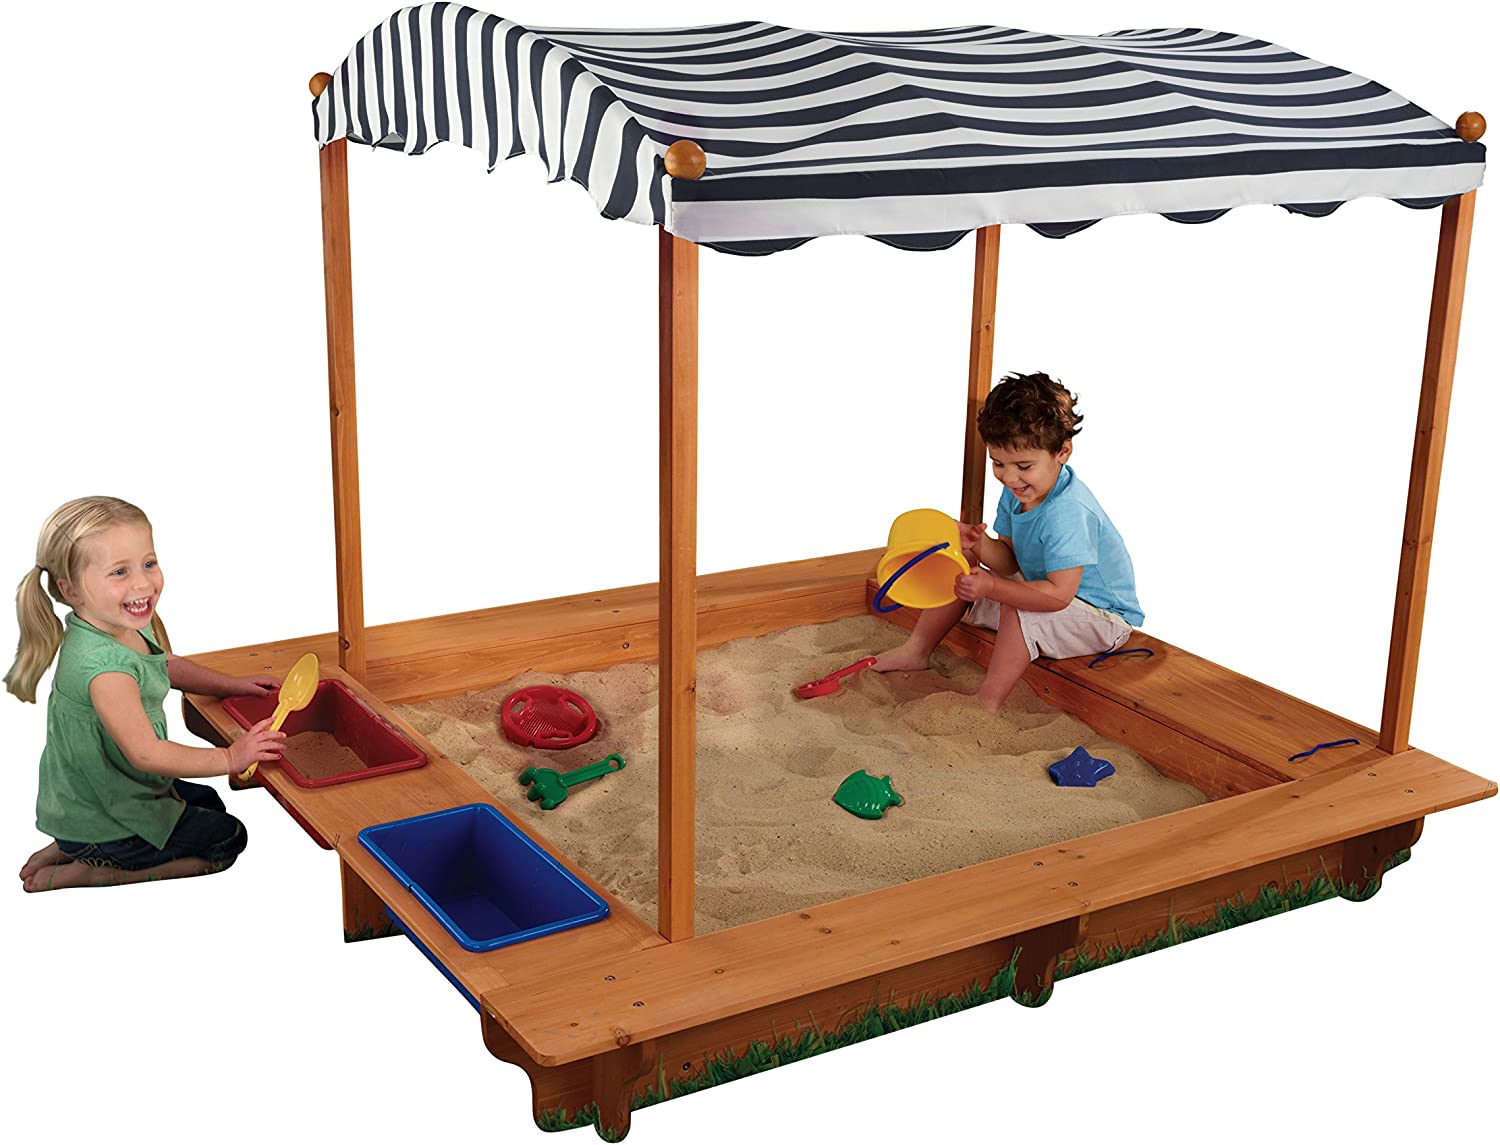 Kids sandbox with a boy and girl playing and black and white canopy 